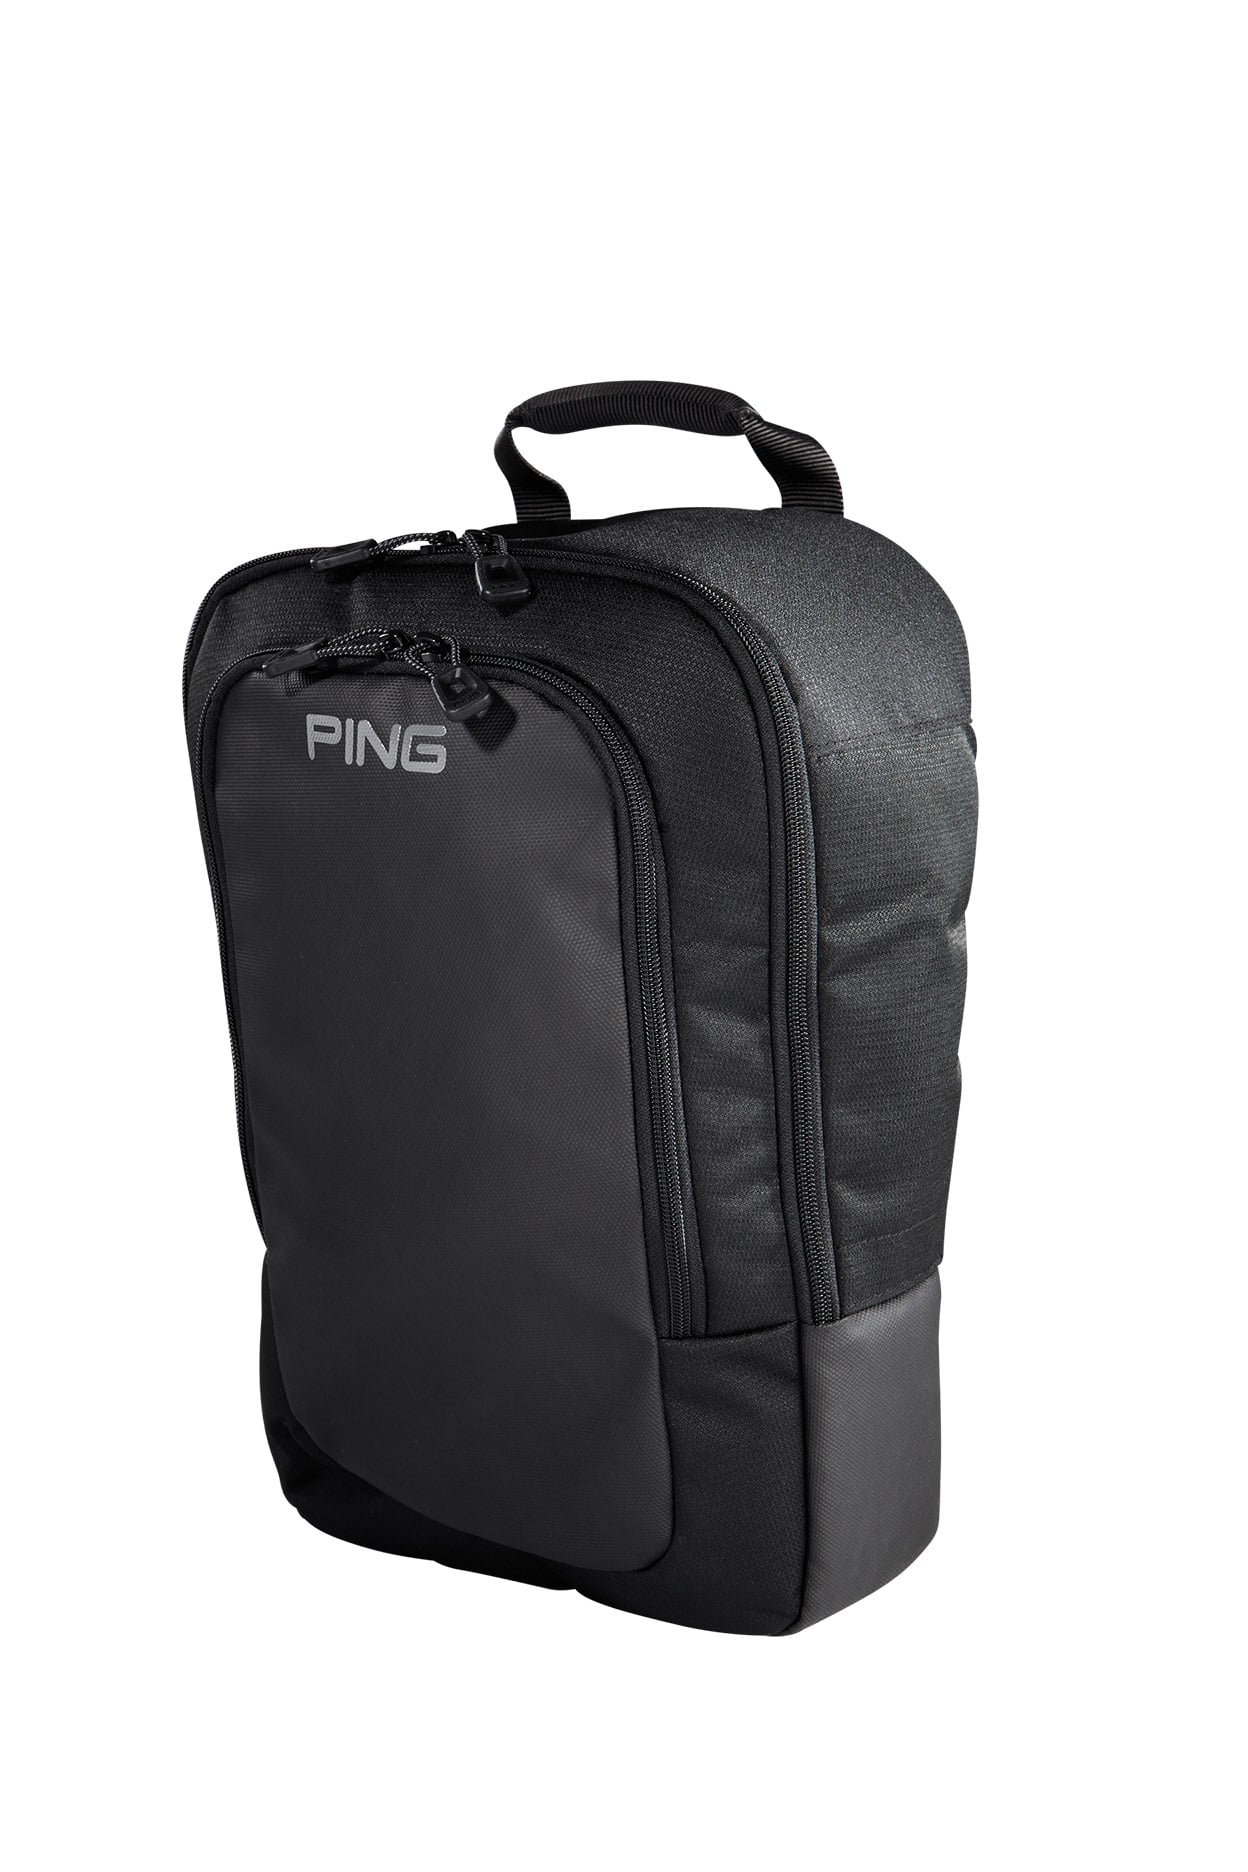 Ping Golf Bag Accessories